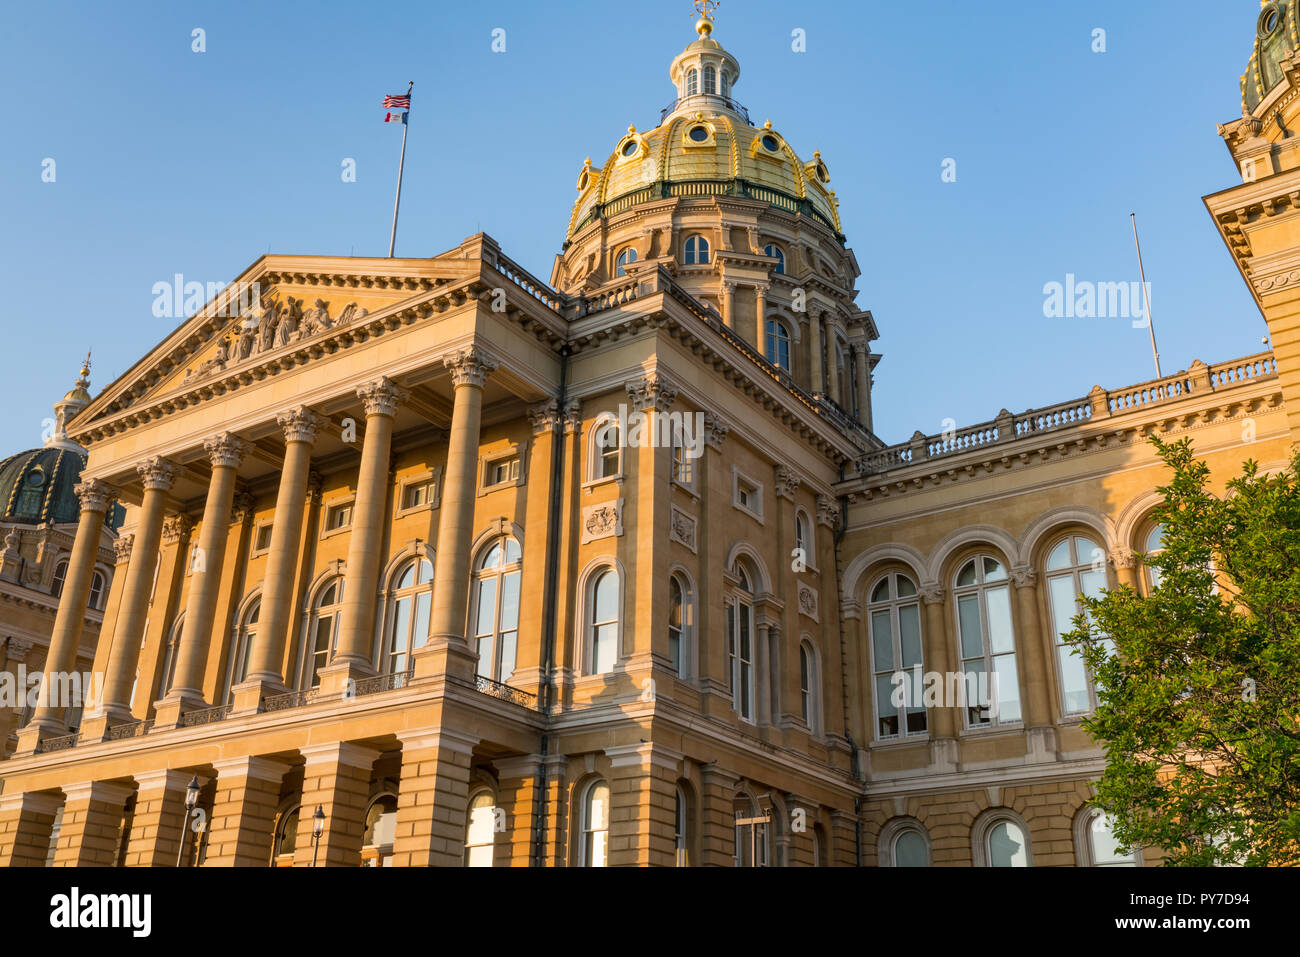 Facade of the Iowa State Capitol Building in Des Moines, Iowa Stock Photo